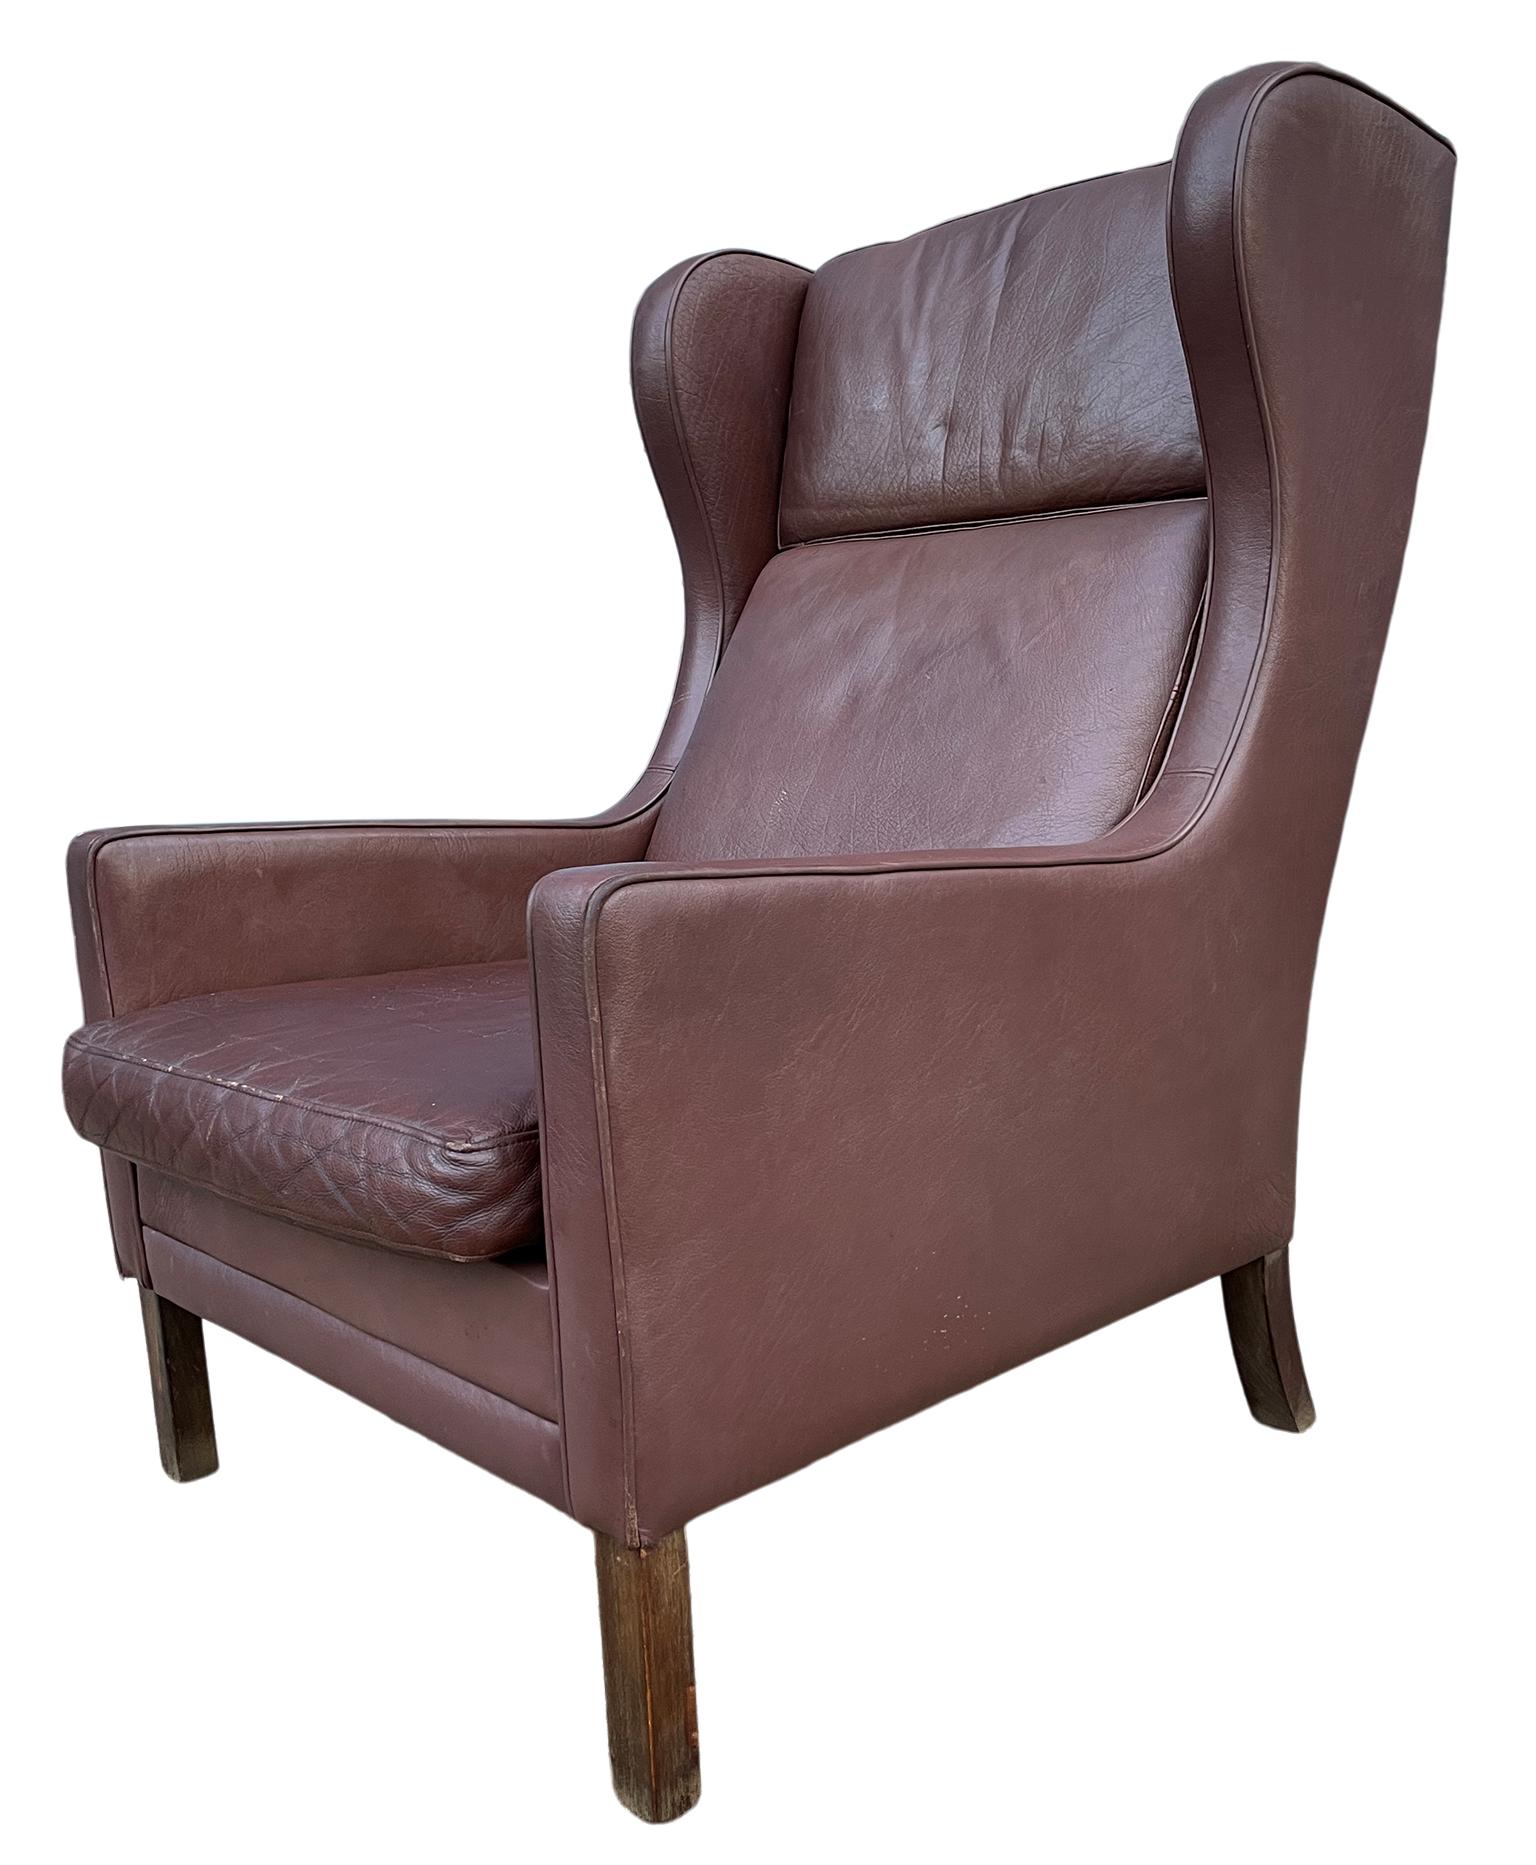 Mid-20th Century Midcentury Danish Modern Wingback Leather Chair by Børge Mogensen